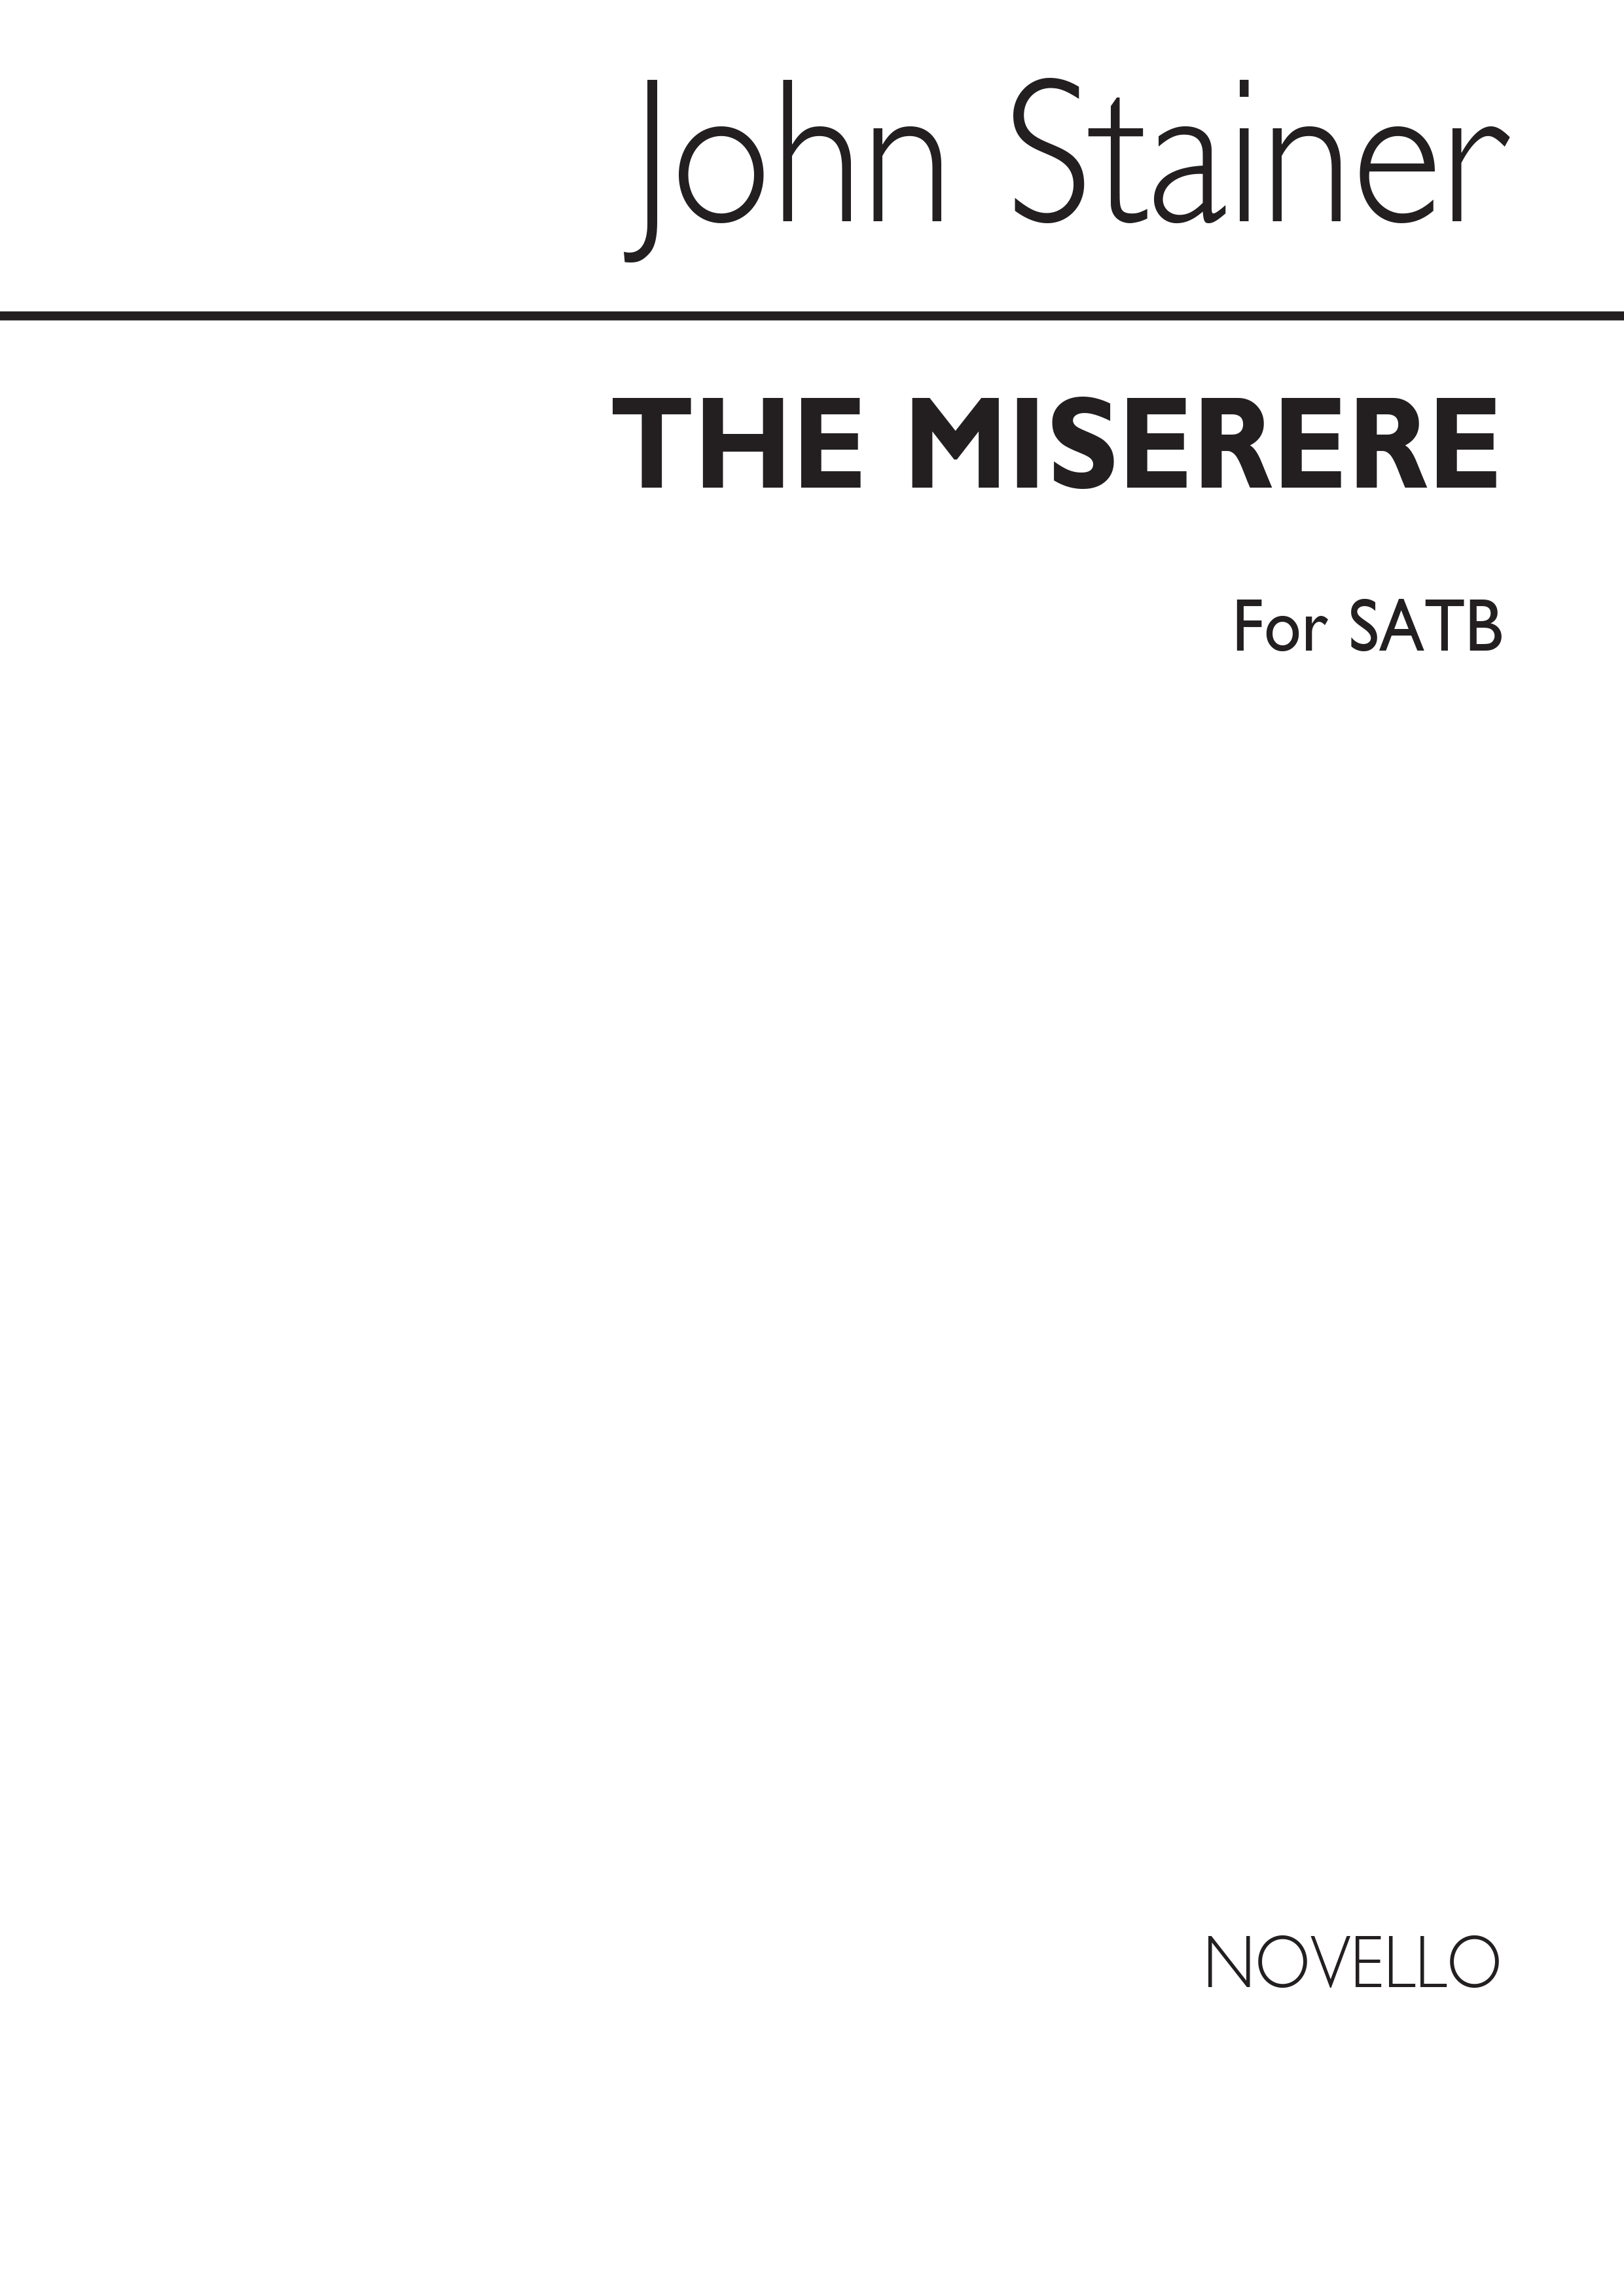 John Stainer: The Miserere Satb/Satb (English)